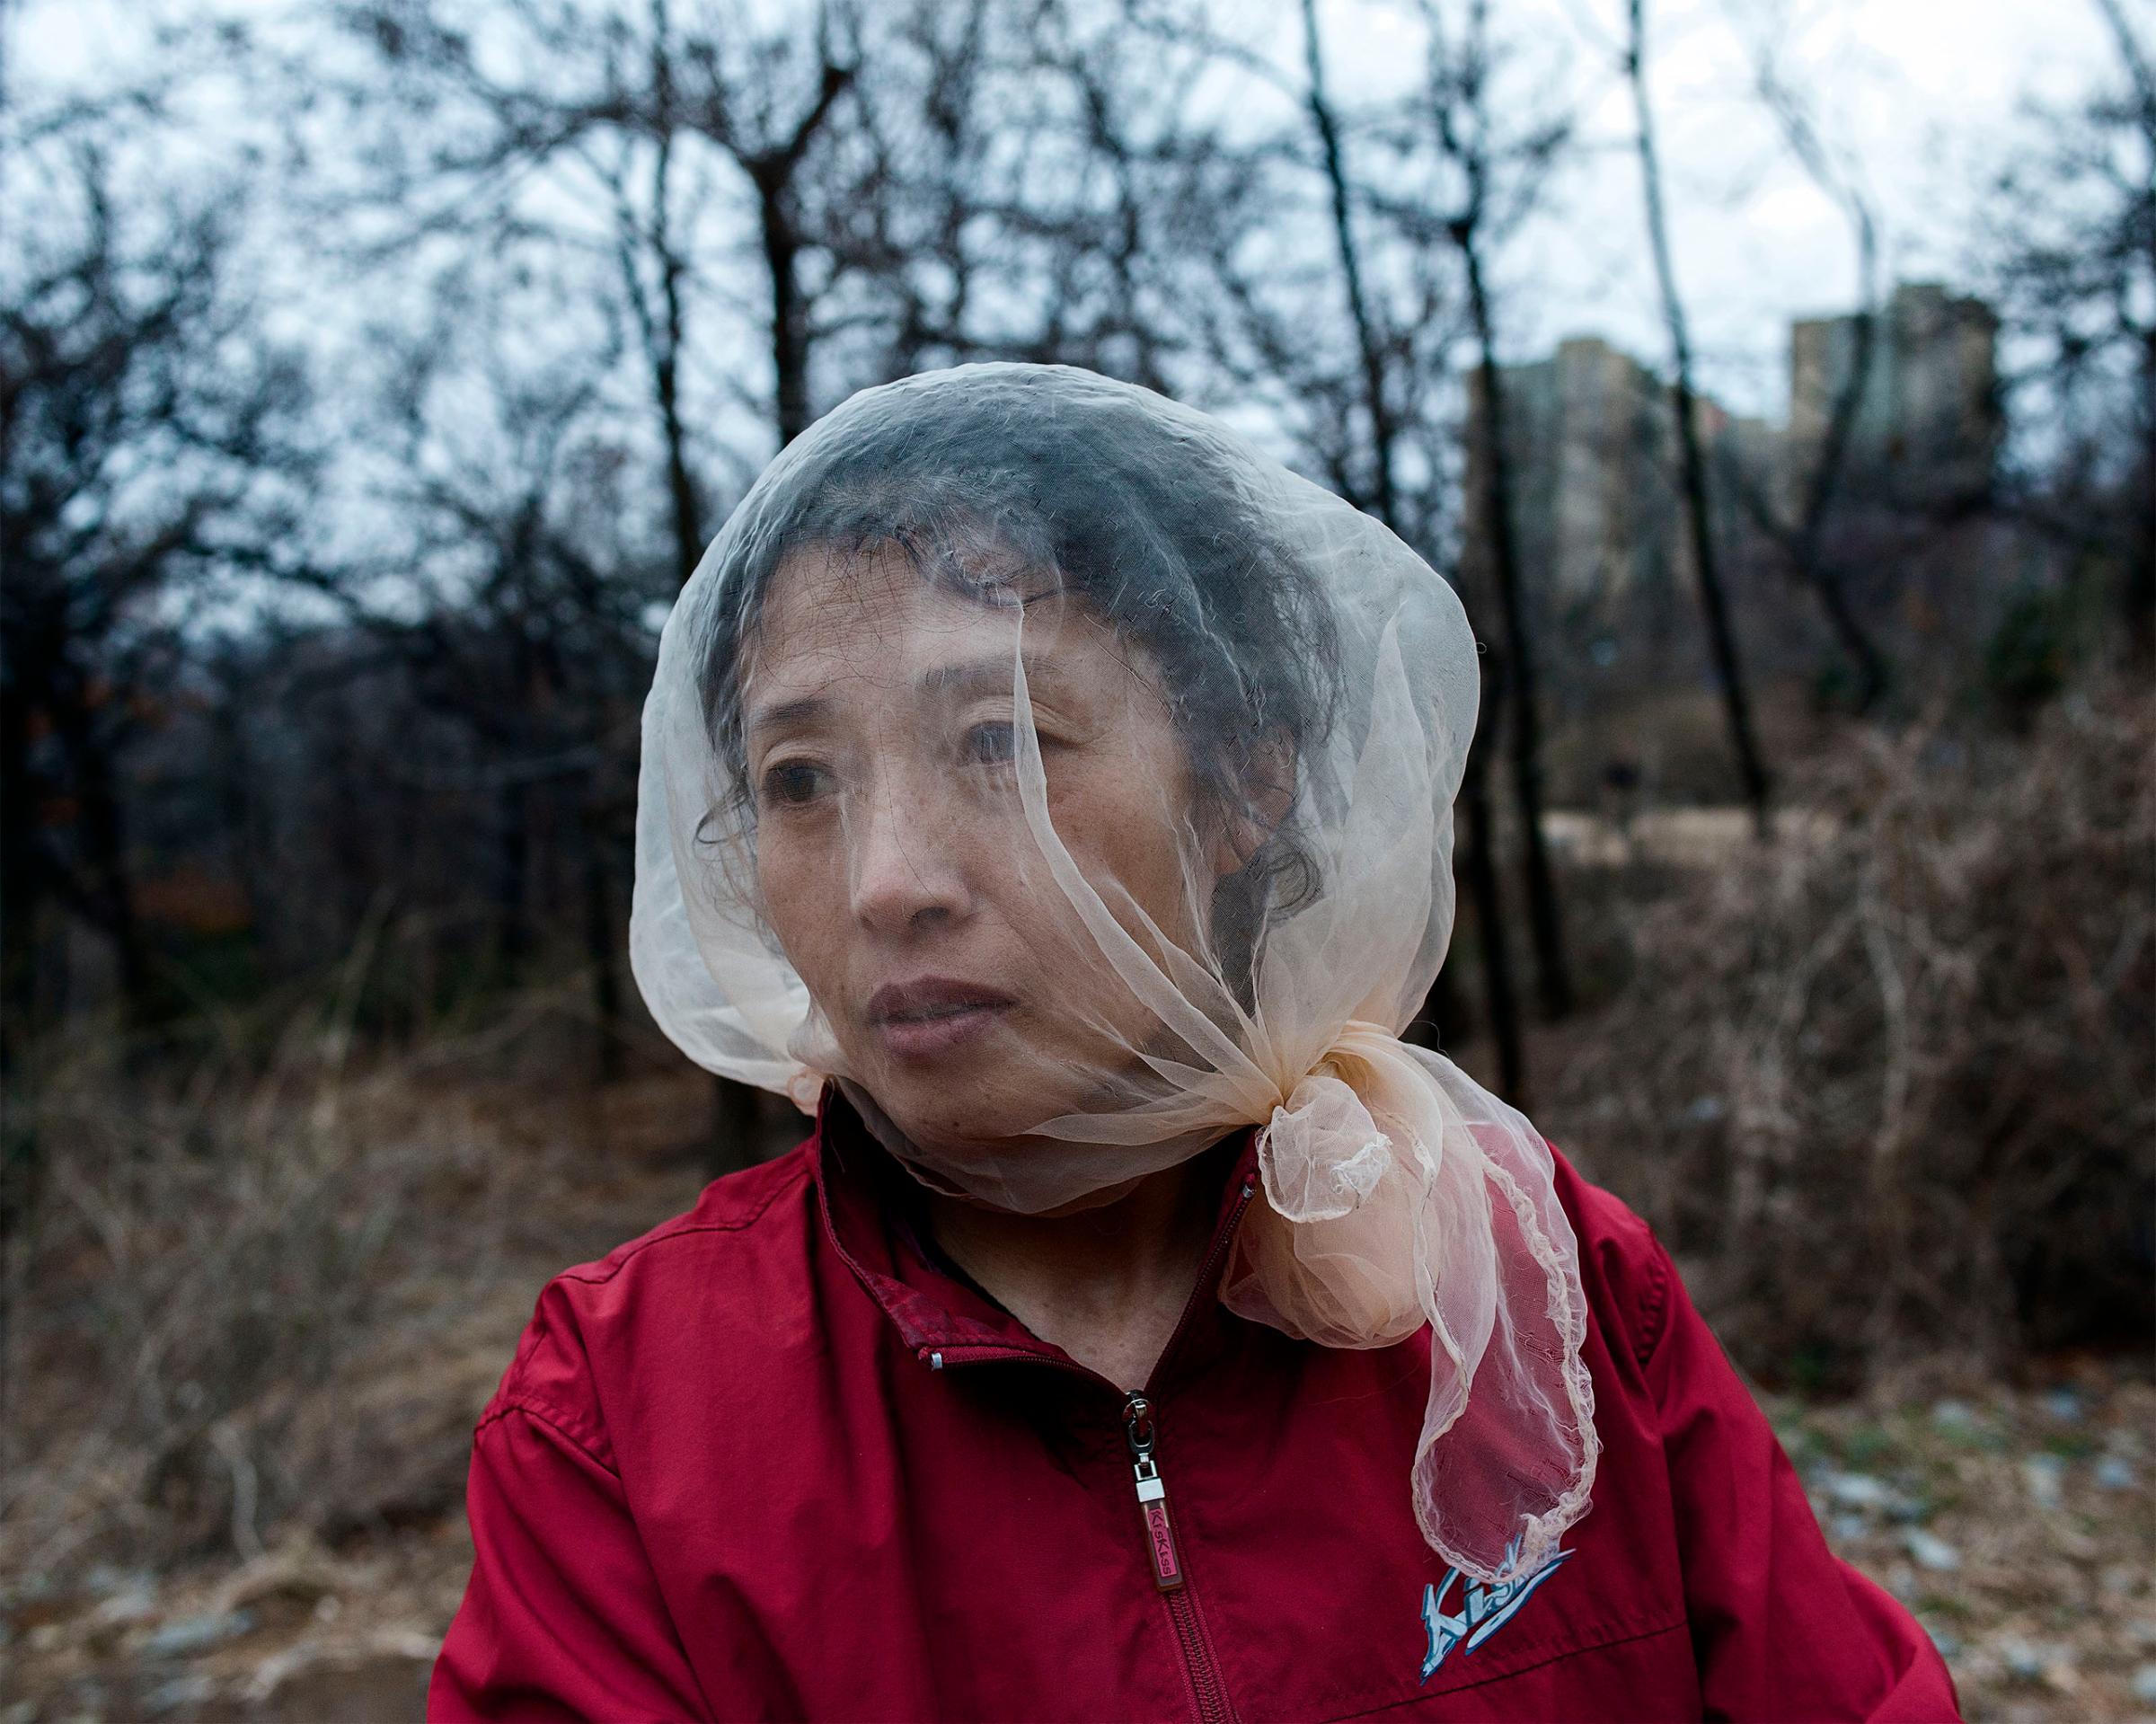 A woman in Dandong, China covers her face with a piece of cloth to protect from mosquitos. In China's border cities, there is a normality to daily life which stands in contrast to the deprivation across the border.